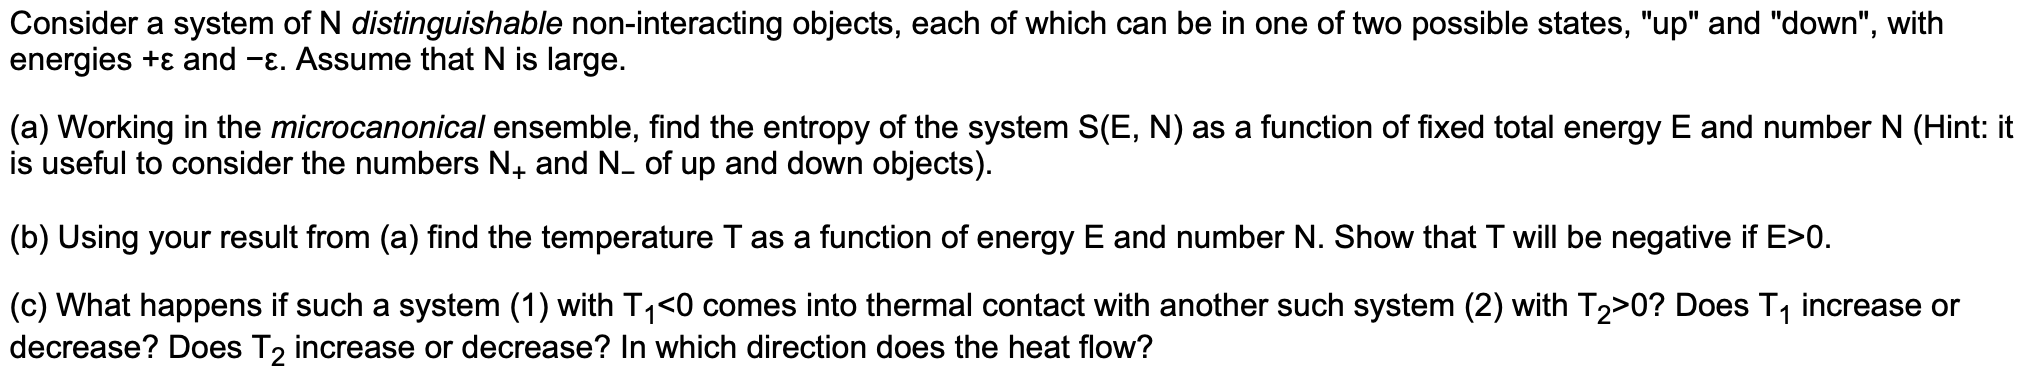 Consider a system of N distinguishable non-interacting objects, each of which can be in one of two possible states, "up" and "down", with
energies +ɛ and -E. Assume that N is large.
(a) Working in the microcanonical ensemble, find the entropy of the system S(E, N) as a function of fixed total energy E and number N (Hint: it
is useful to consider the numbers N. and N. of up and down objects).
(b) Using your result from (a) find the temperature T as a function of energy E and number N. Show that T will be negative if E>0.
(c) What happens if such a system (1) with T1<0 comes into thermal contact with another such system (2) with T2>0? Does T, increase or
decrease? Does T2 increase or decrease? In which direction does the heat flow?
